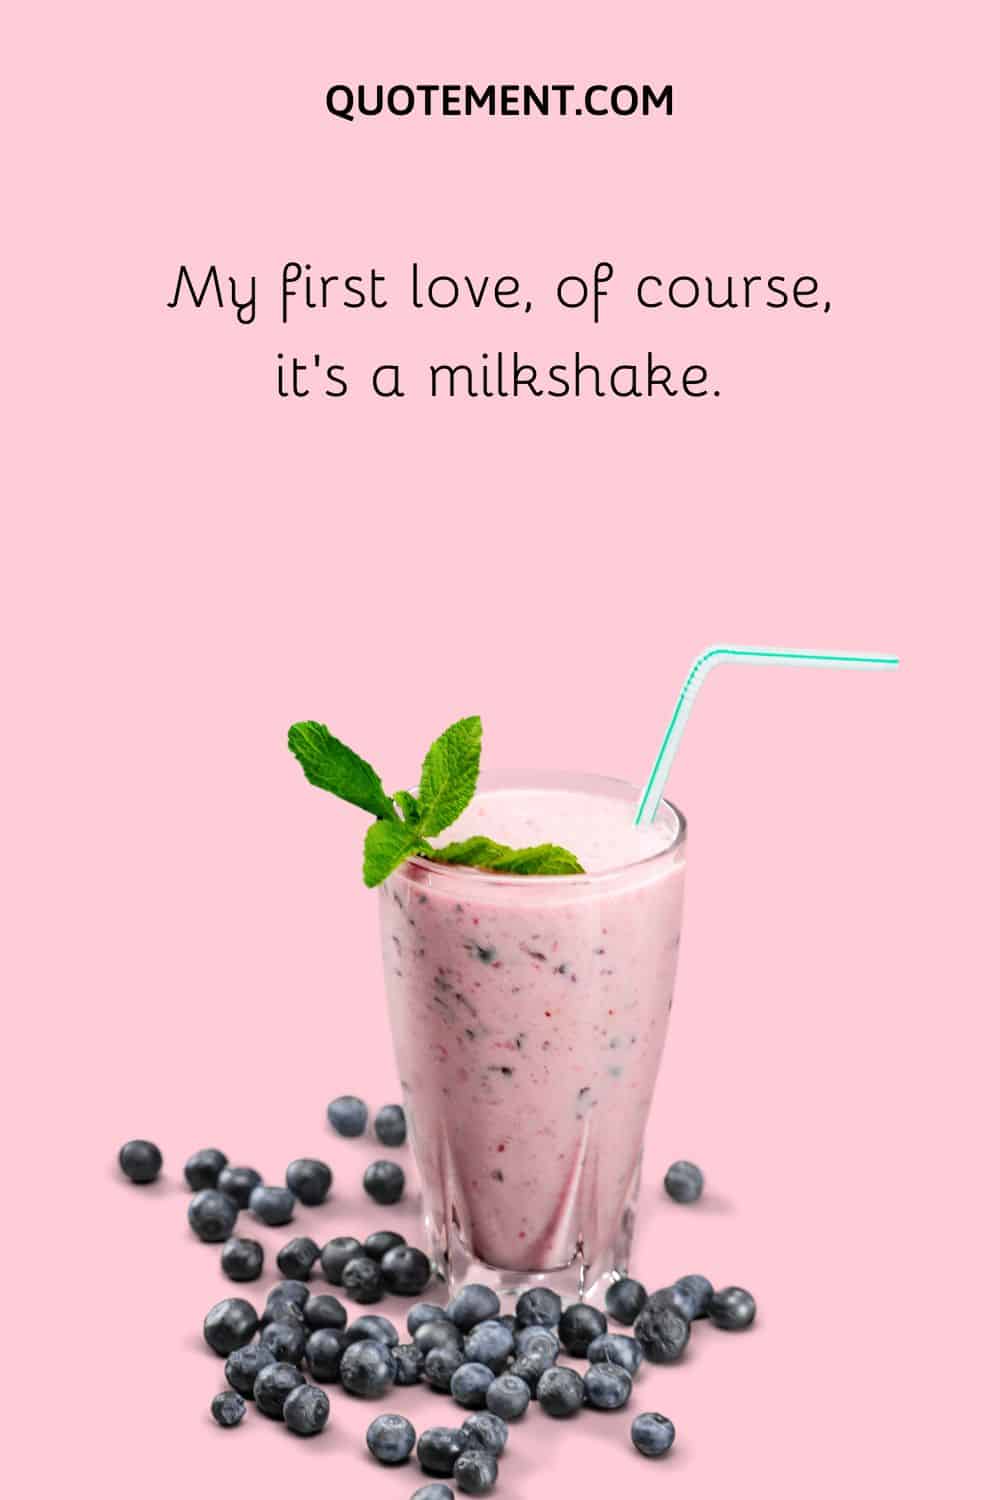 My first love, of course, it’s a milkshake.